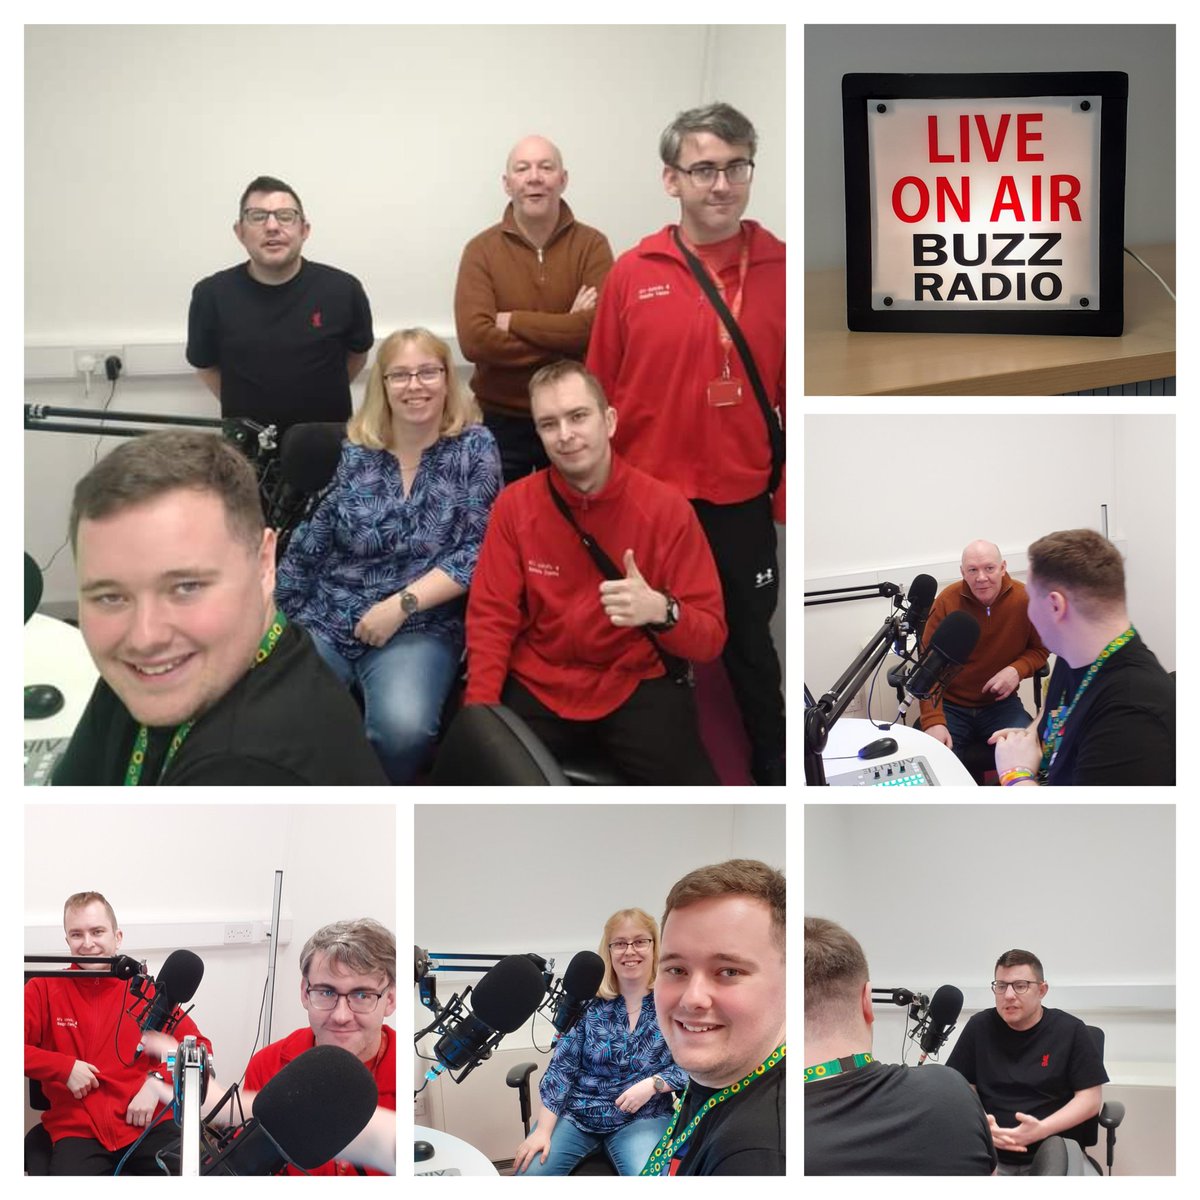 Today our Hate Crime Ambassadors from @AlsClubKnowsley visited @StHelensCDP Buzz Radio to start planning our radio show @LD_WITH_KDC @MerseyPolice